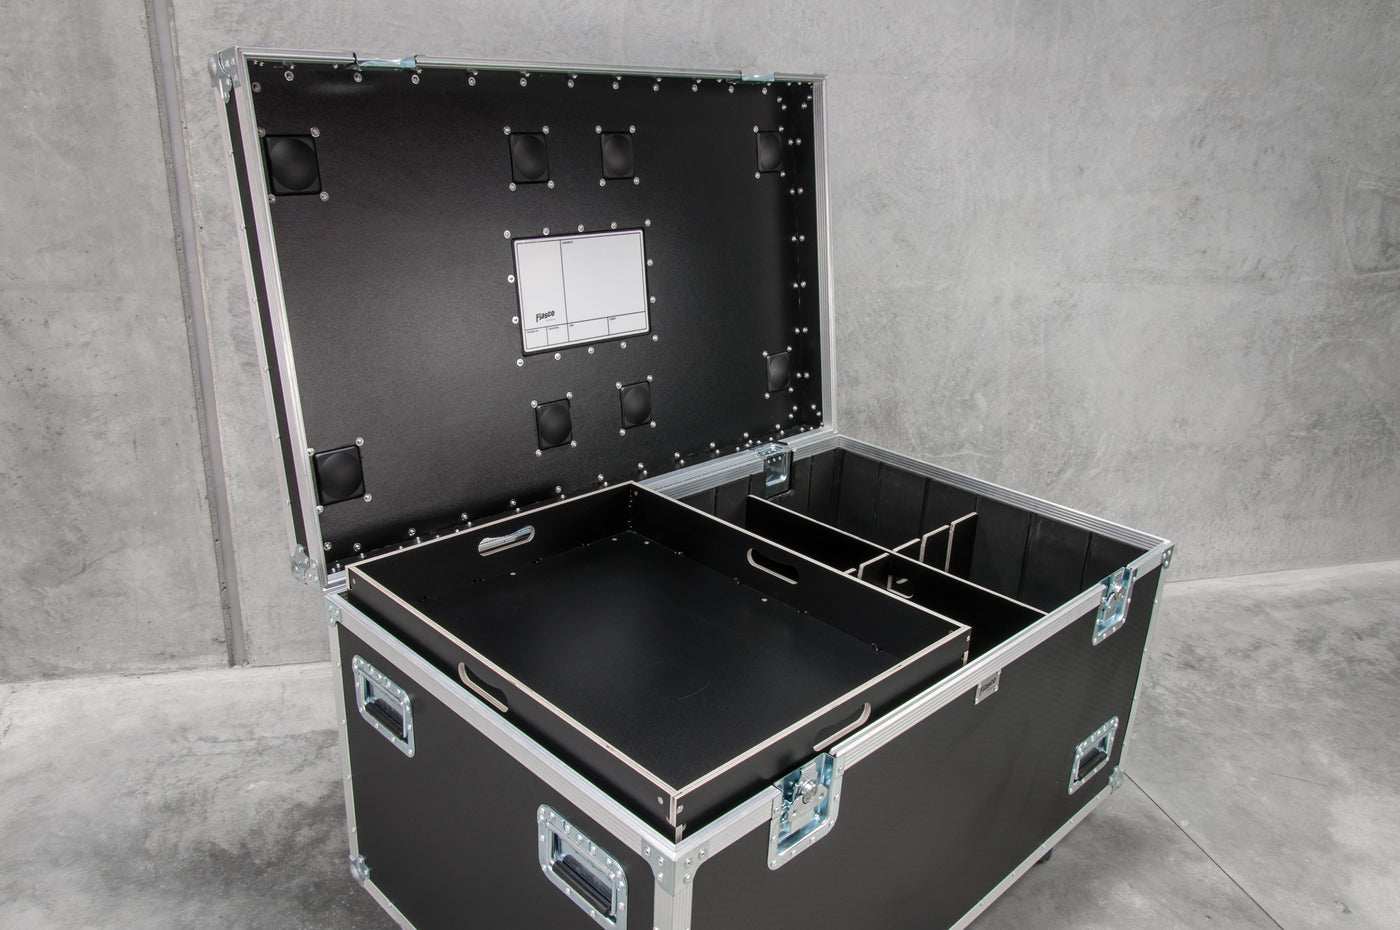 48 x 30 Tall Road Case with Divider Insert and Tray